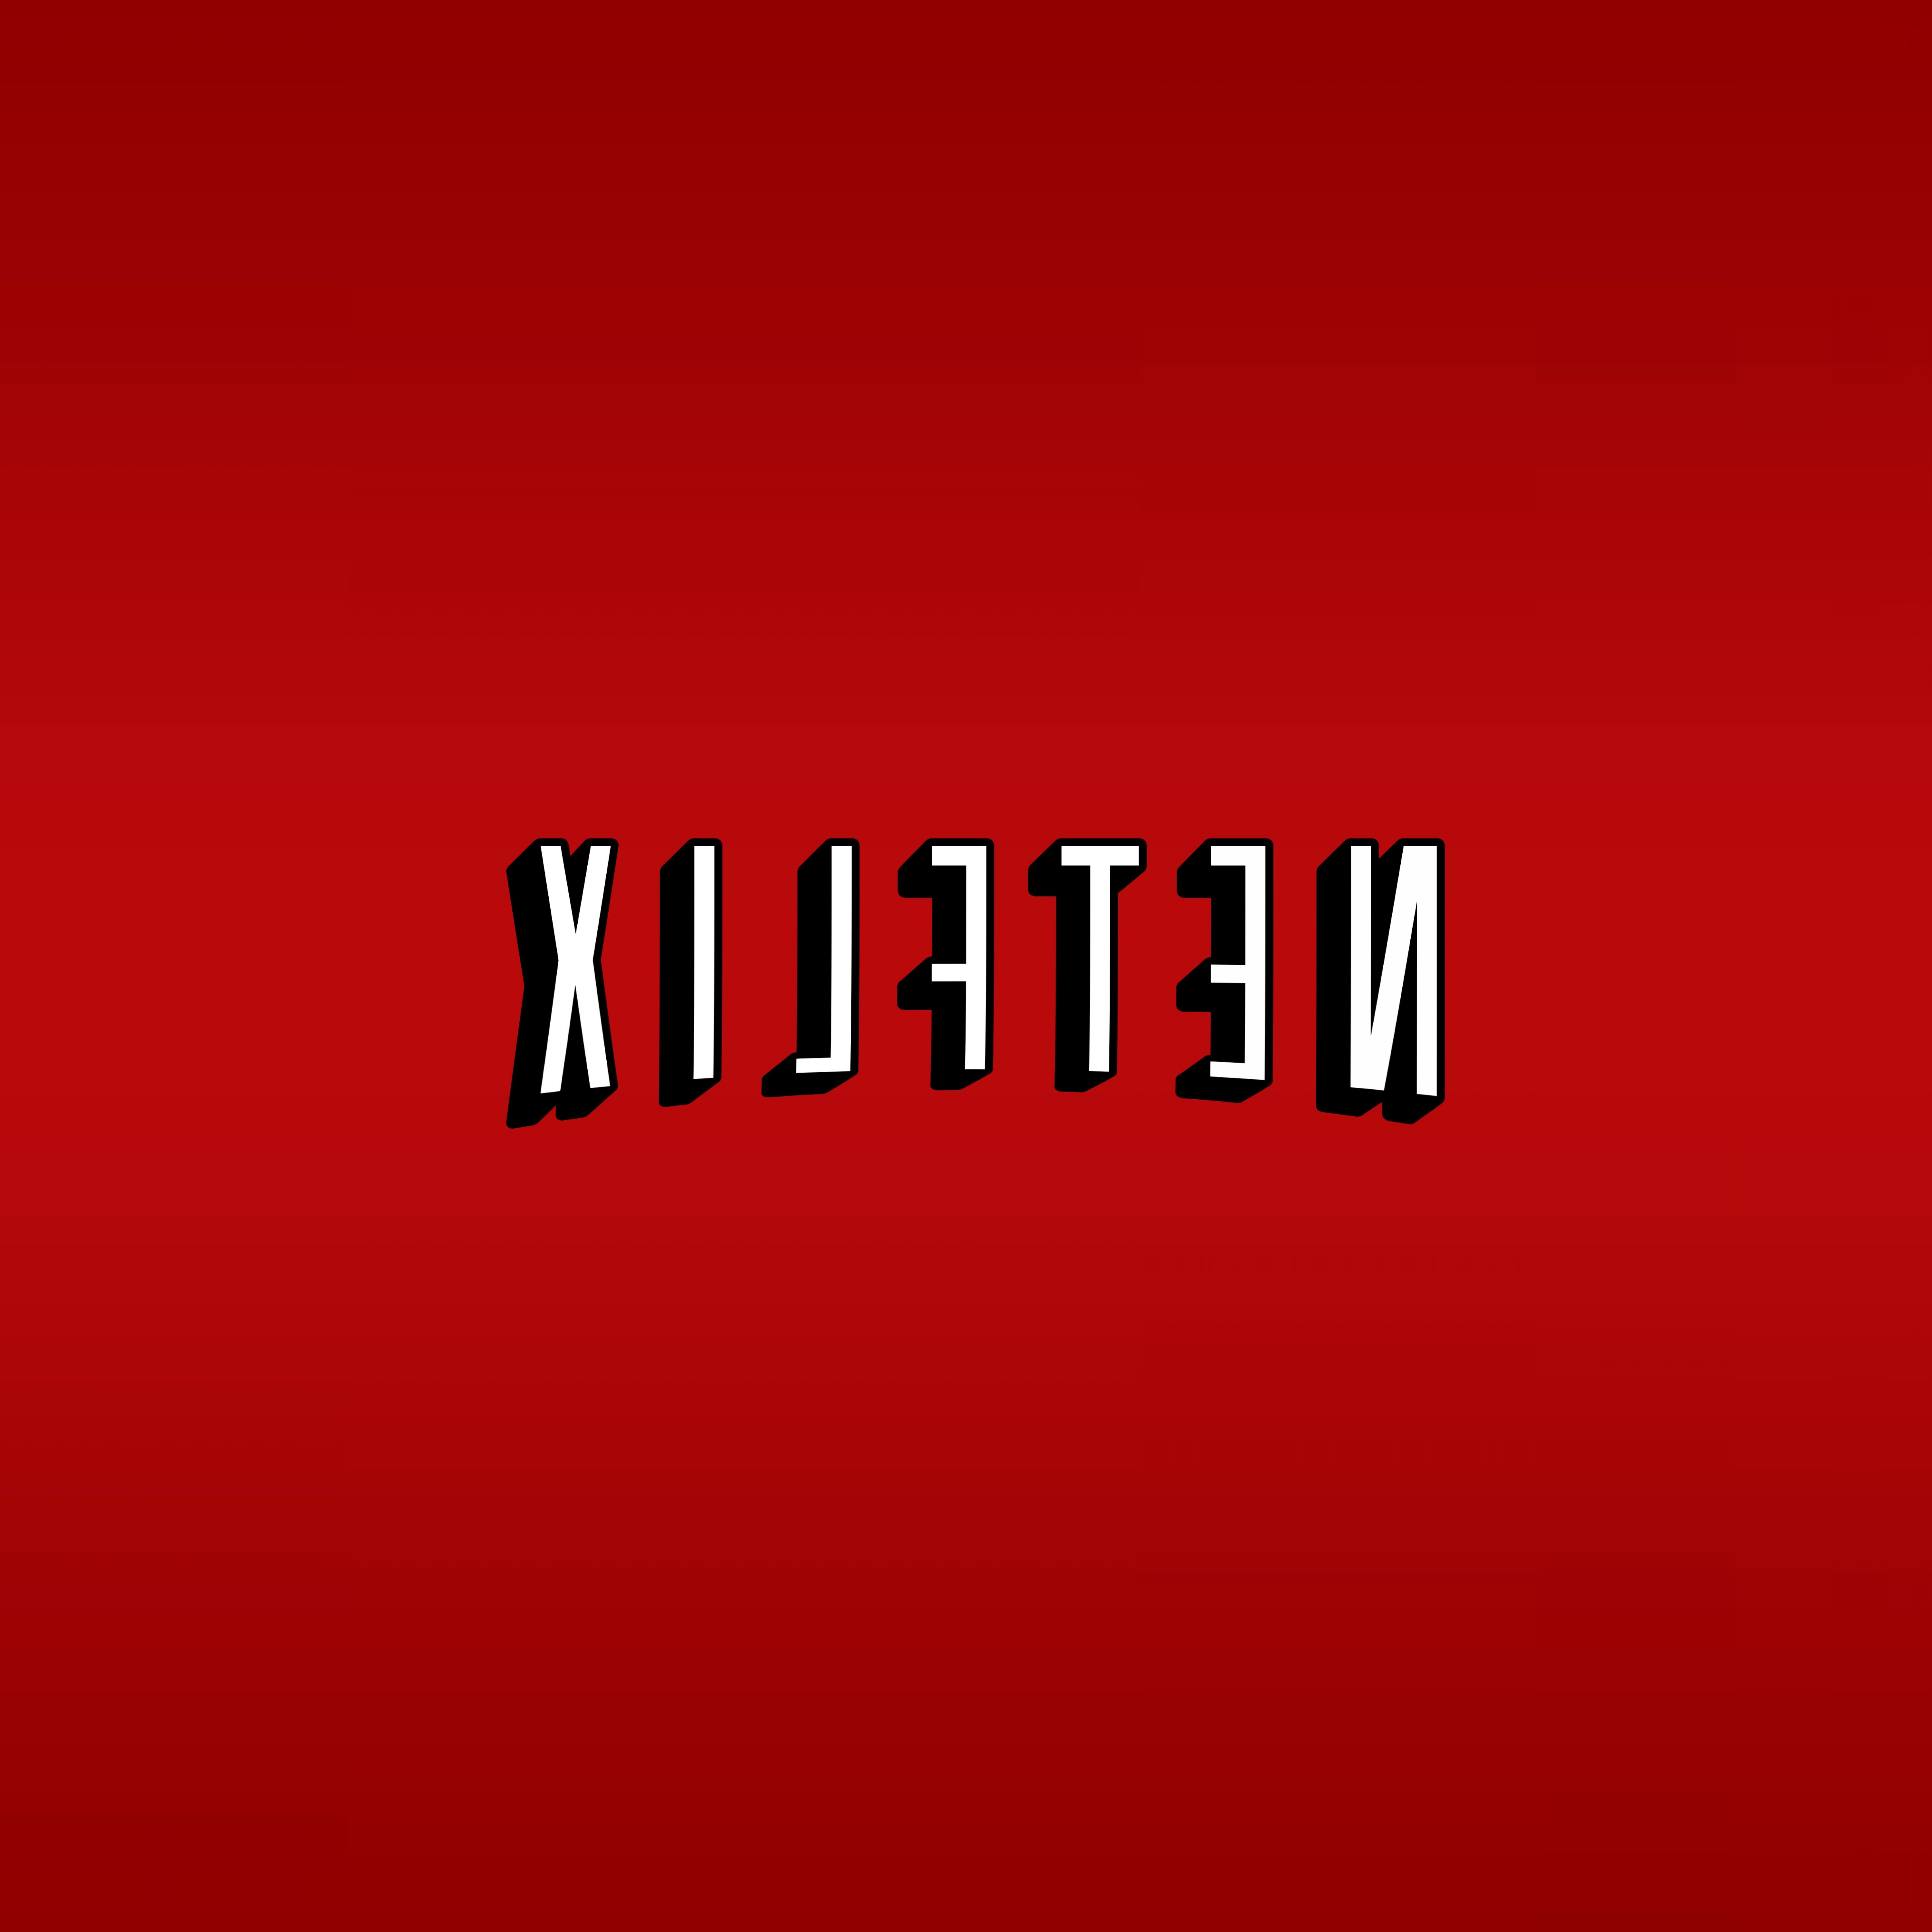 Download Netflix Logo Vector at Vectorified.com | Collection of ...